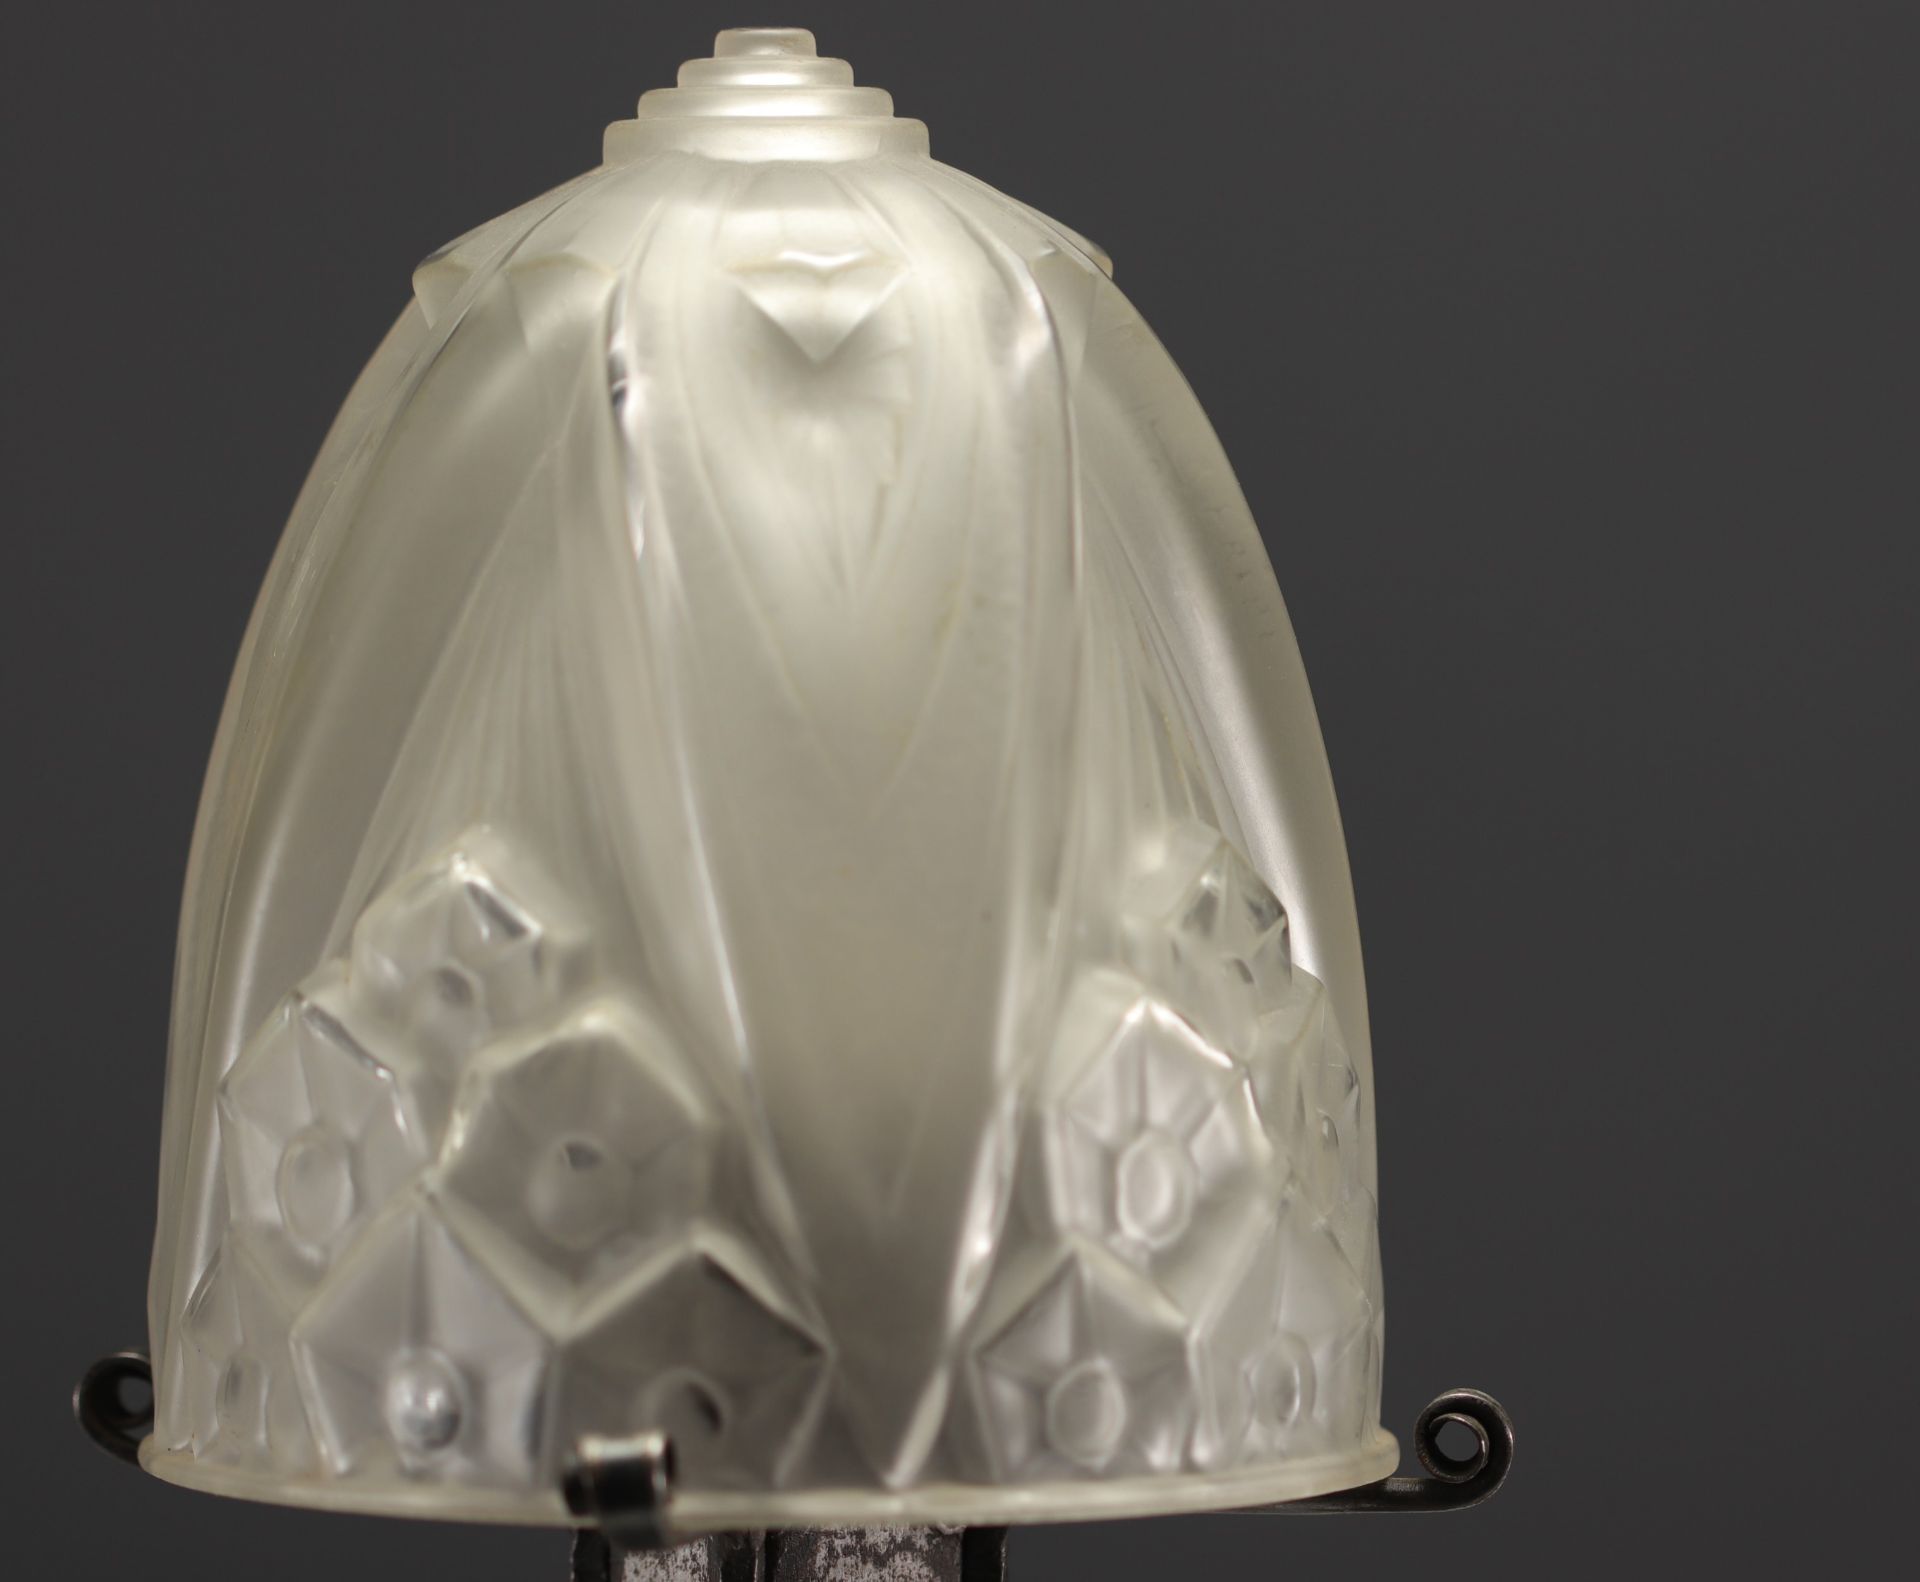 Muller Freres Luneville - Art Deco lamp, glass globe with geometric decoration. - Image 3 of 5